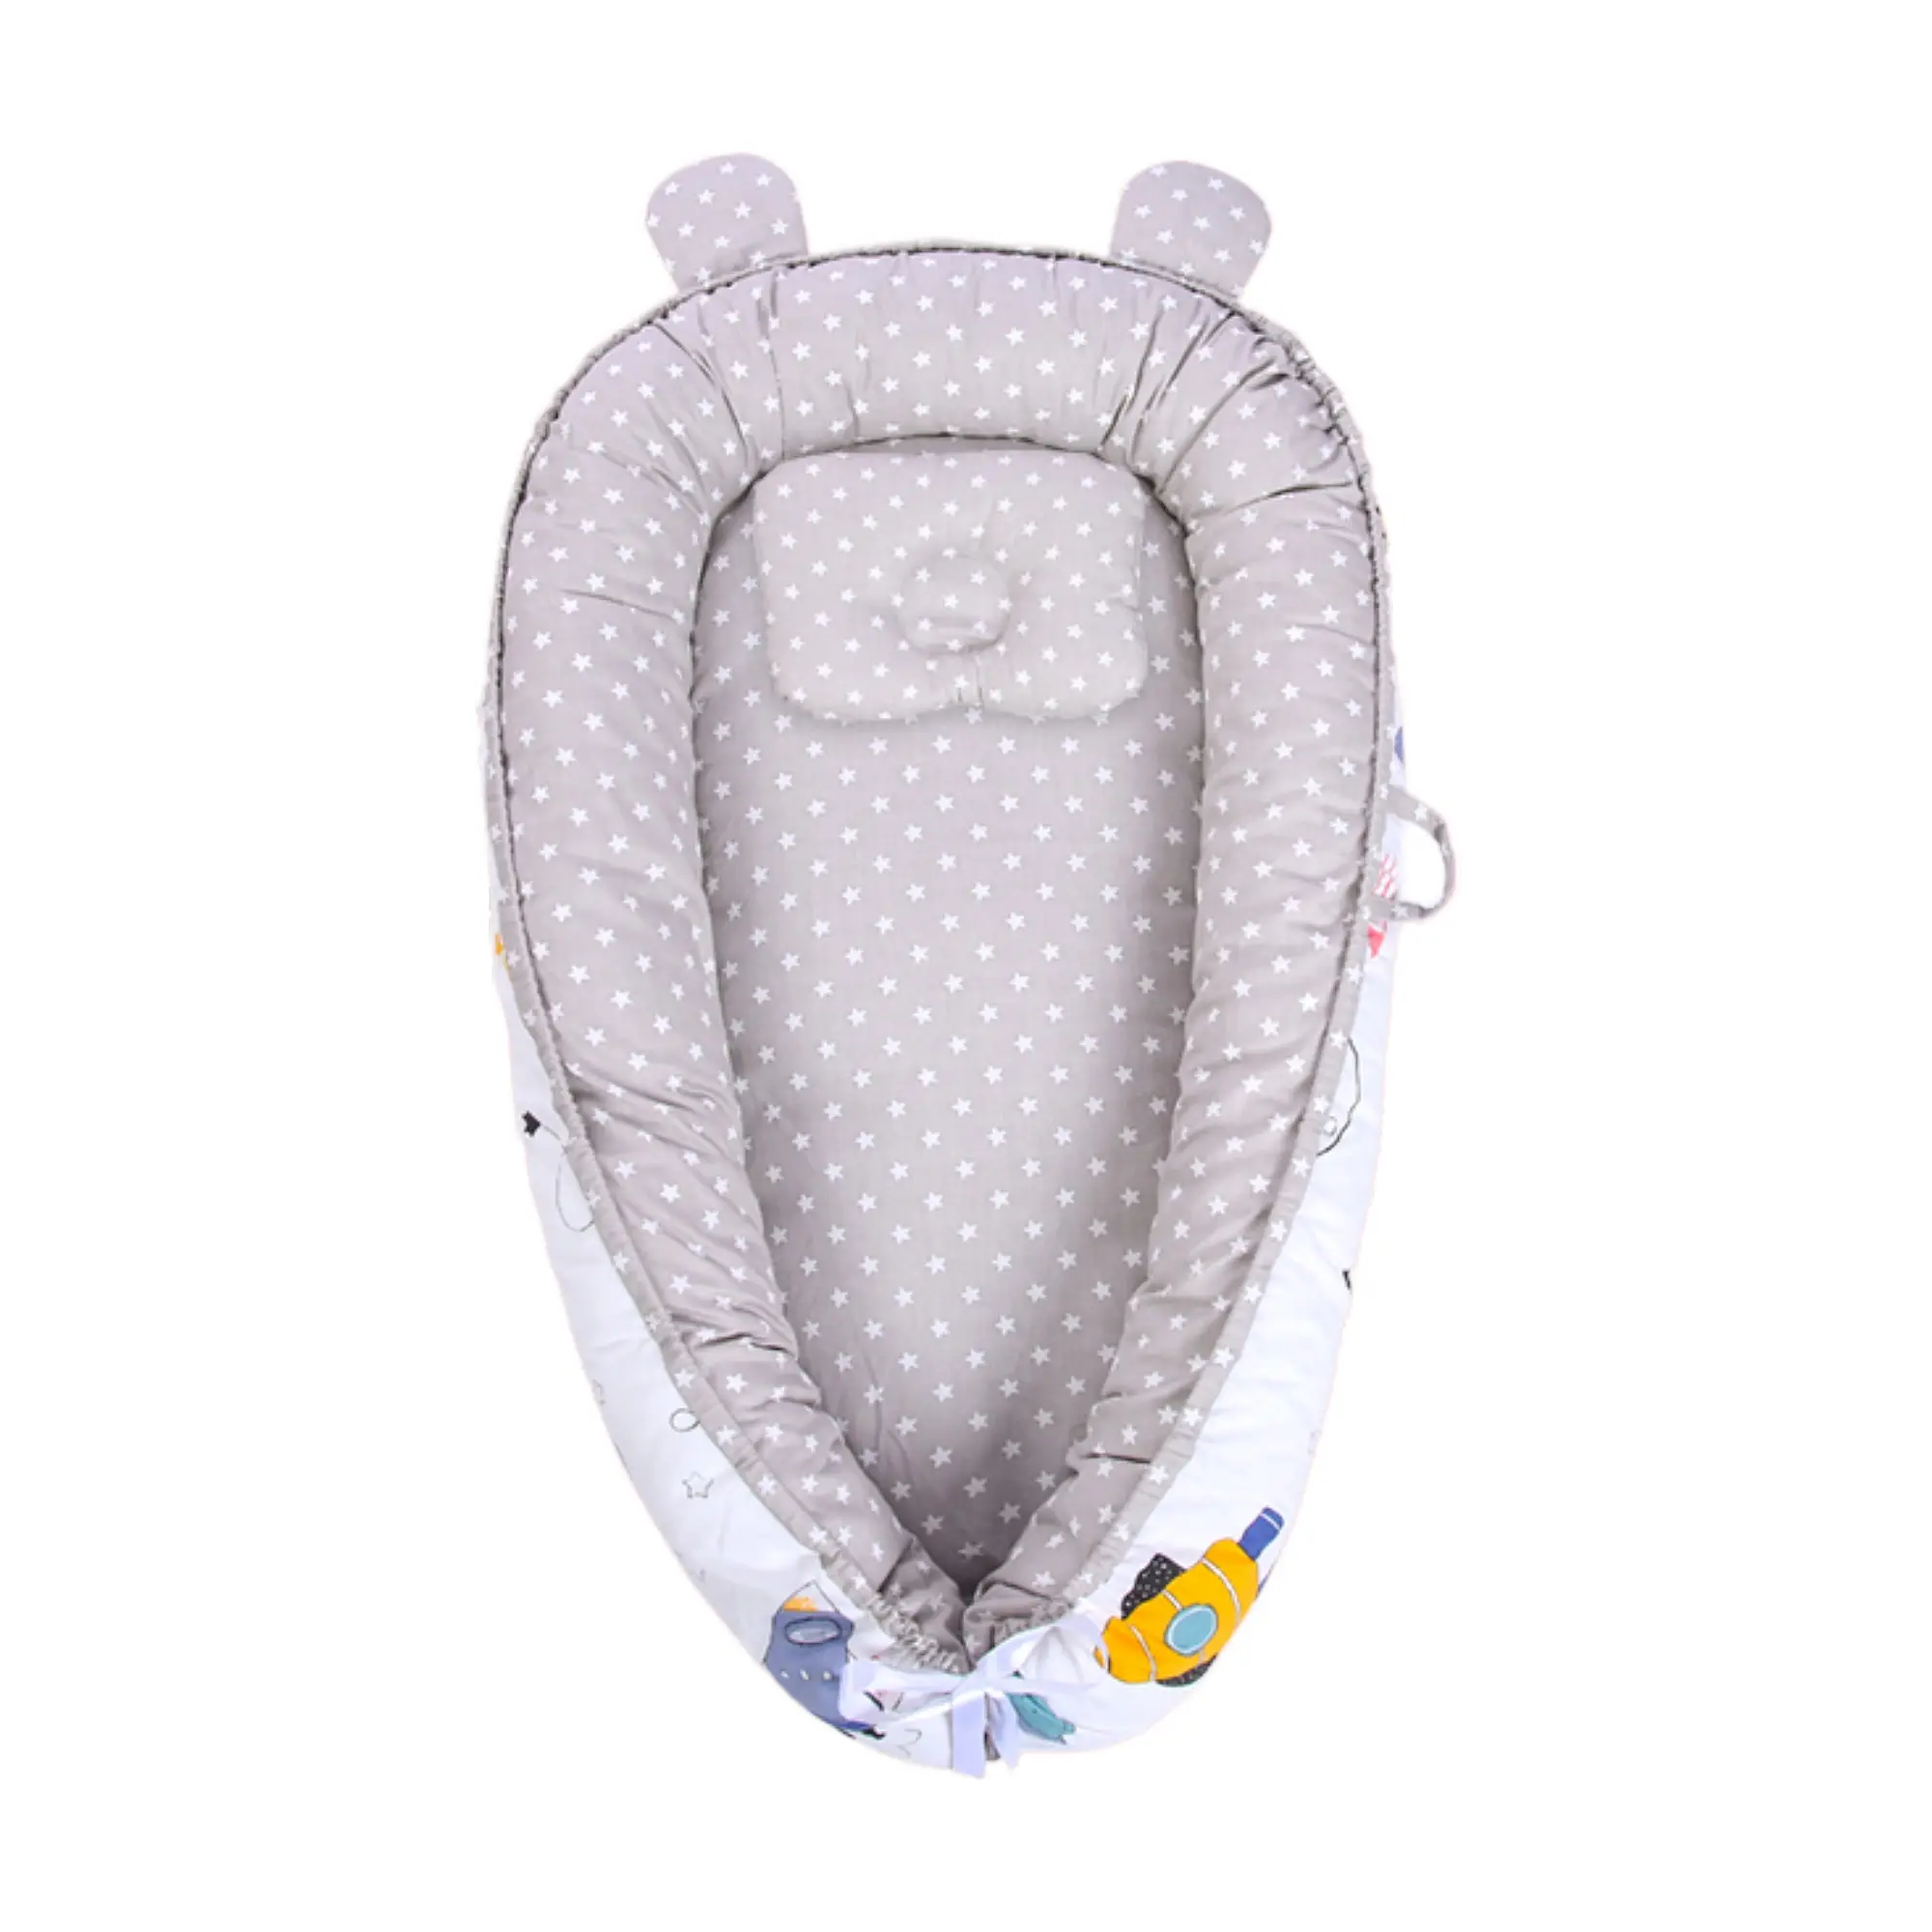 New Born Baby Boy Lounger Baby Co-sleeper Bassinet Portable Newborn Lounger Nest for Napping&Traveling Baby Shower Favors Gifts